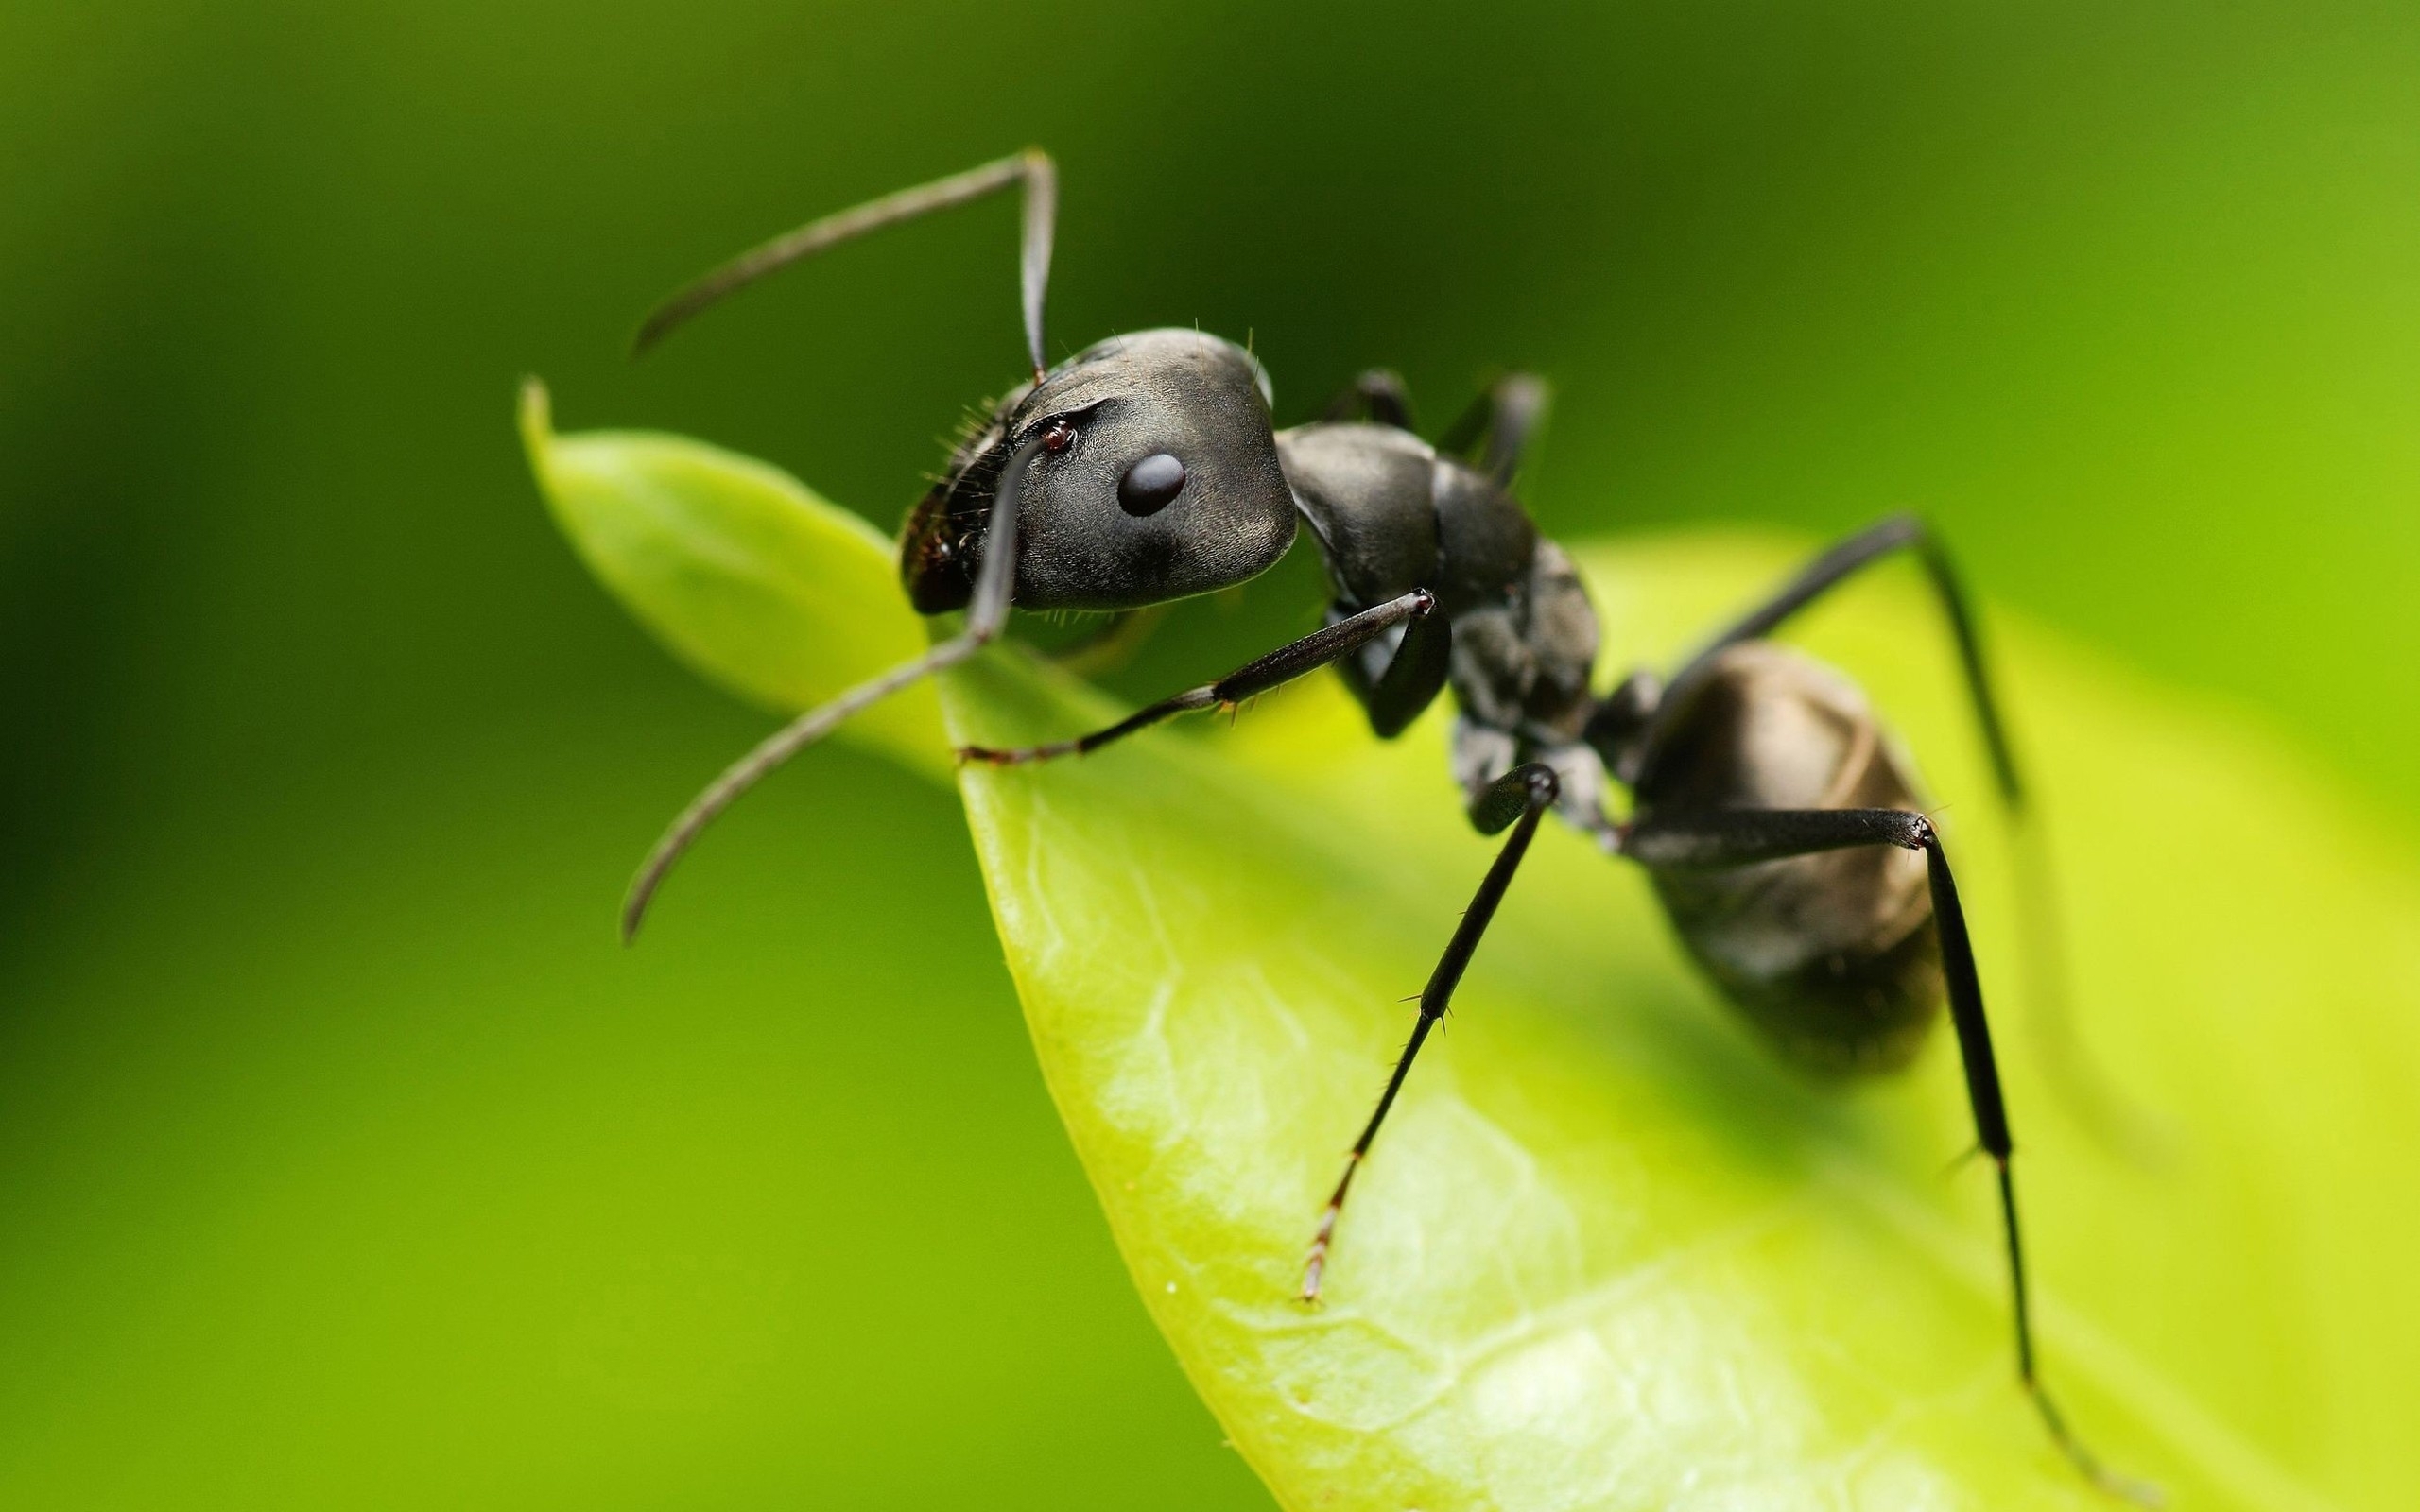 ant wallpaper,insect,ant,pest,carpenter ant,macro photography